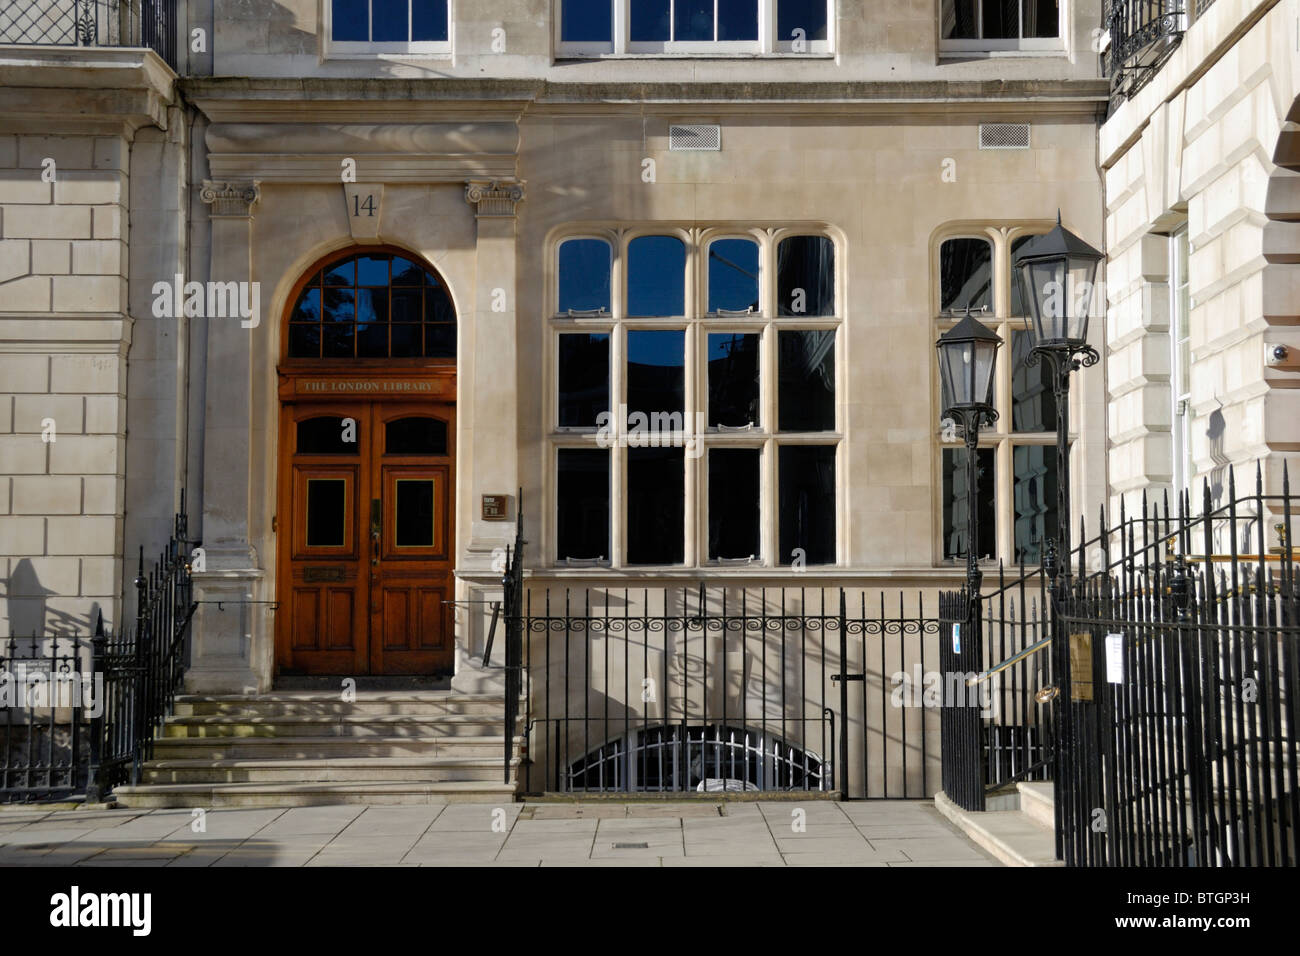 The London Library, St James’s Square, London, England Stock Photo